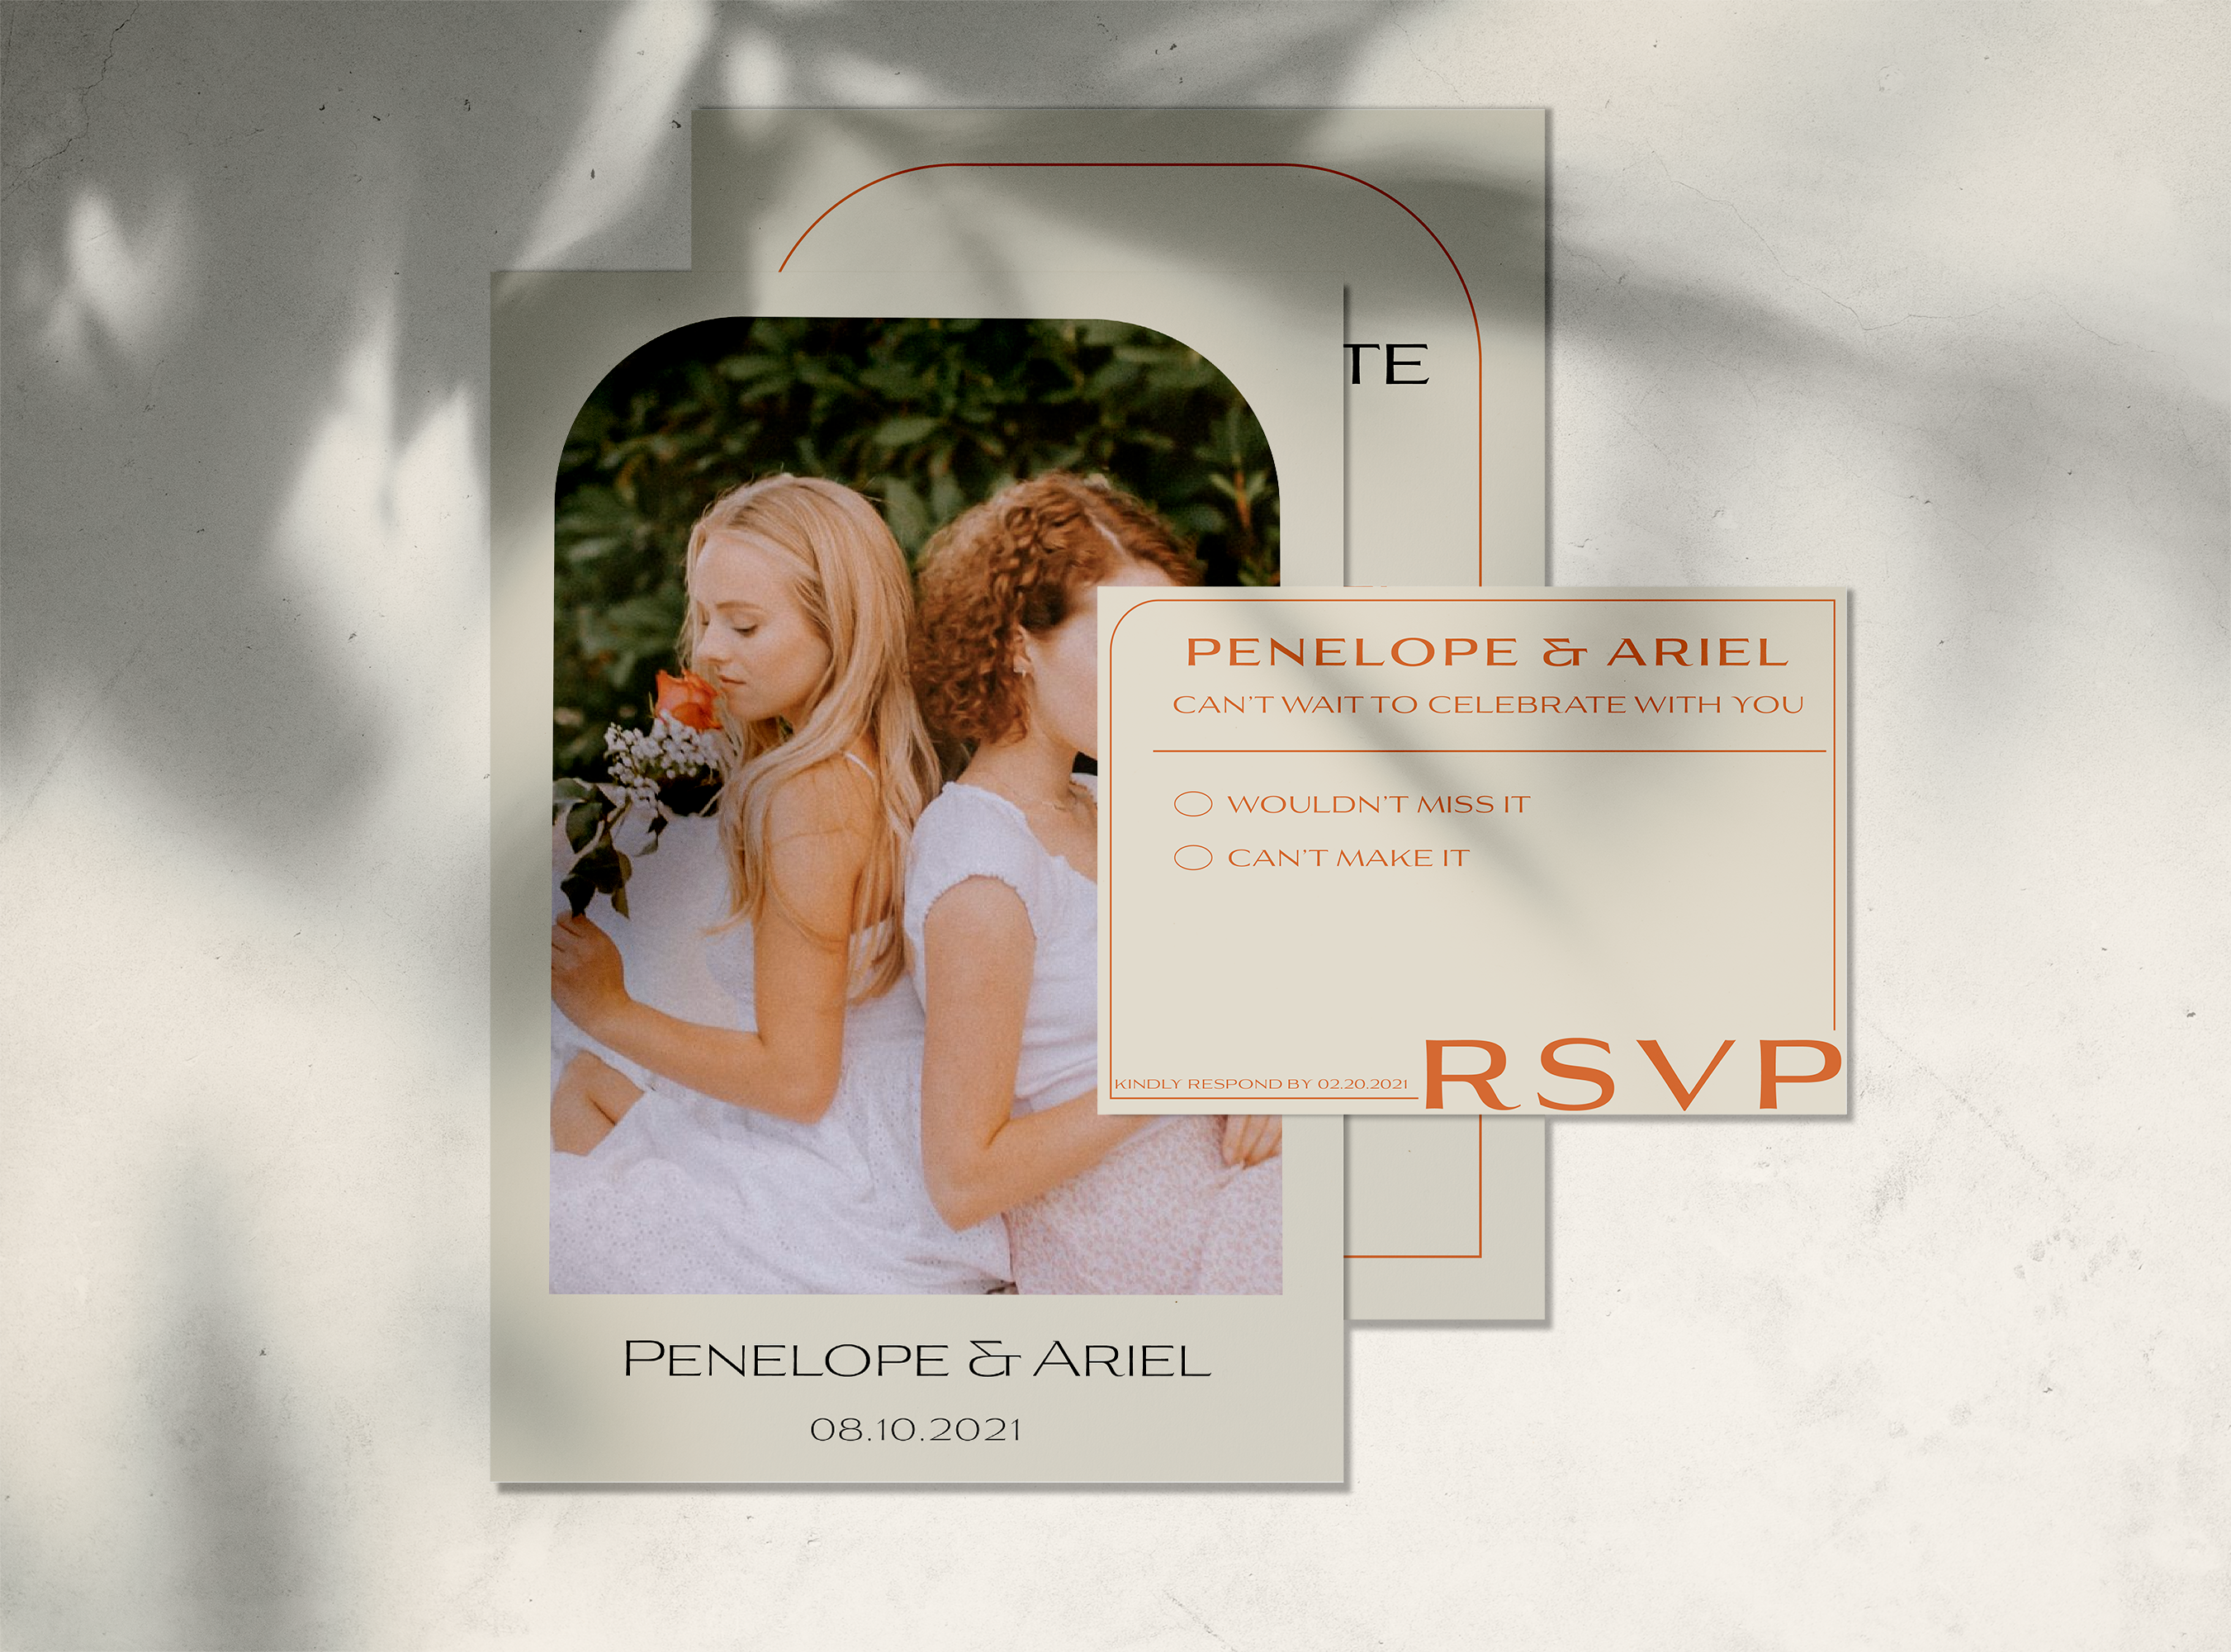 RSVP and SAVE THE DATE